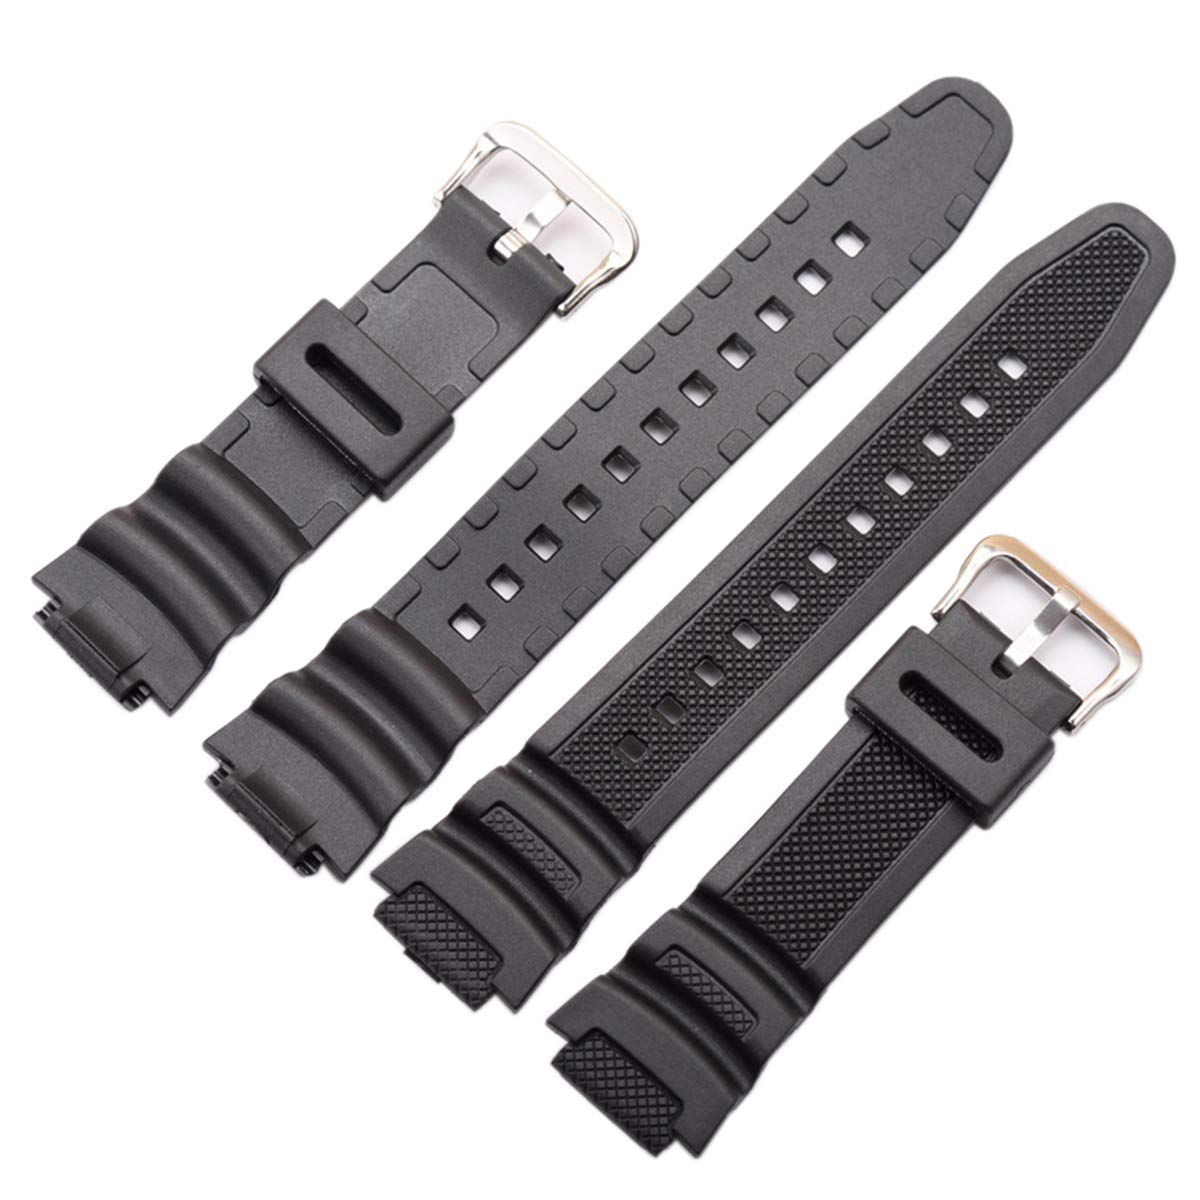 Waterproof Natural Resin Replacement Watch Band for Casio AQ- S800W SGW-300H MRW-200H AE-1200 W-800H W-735H